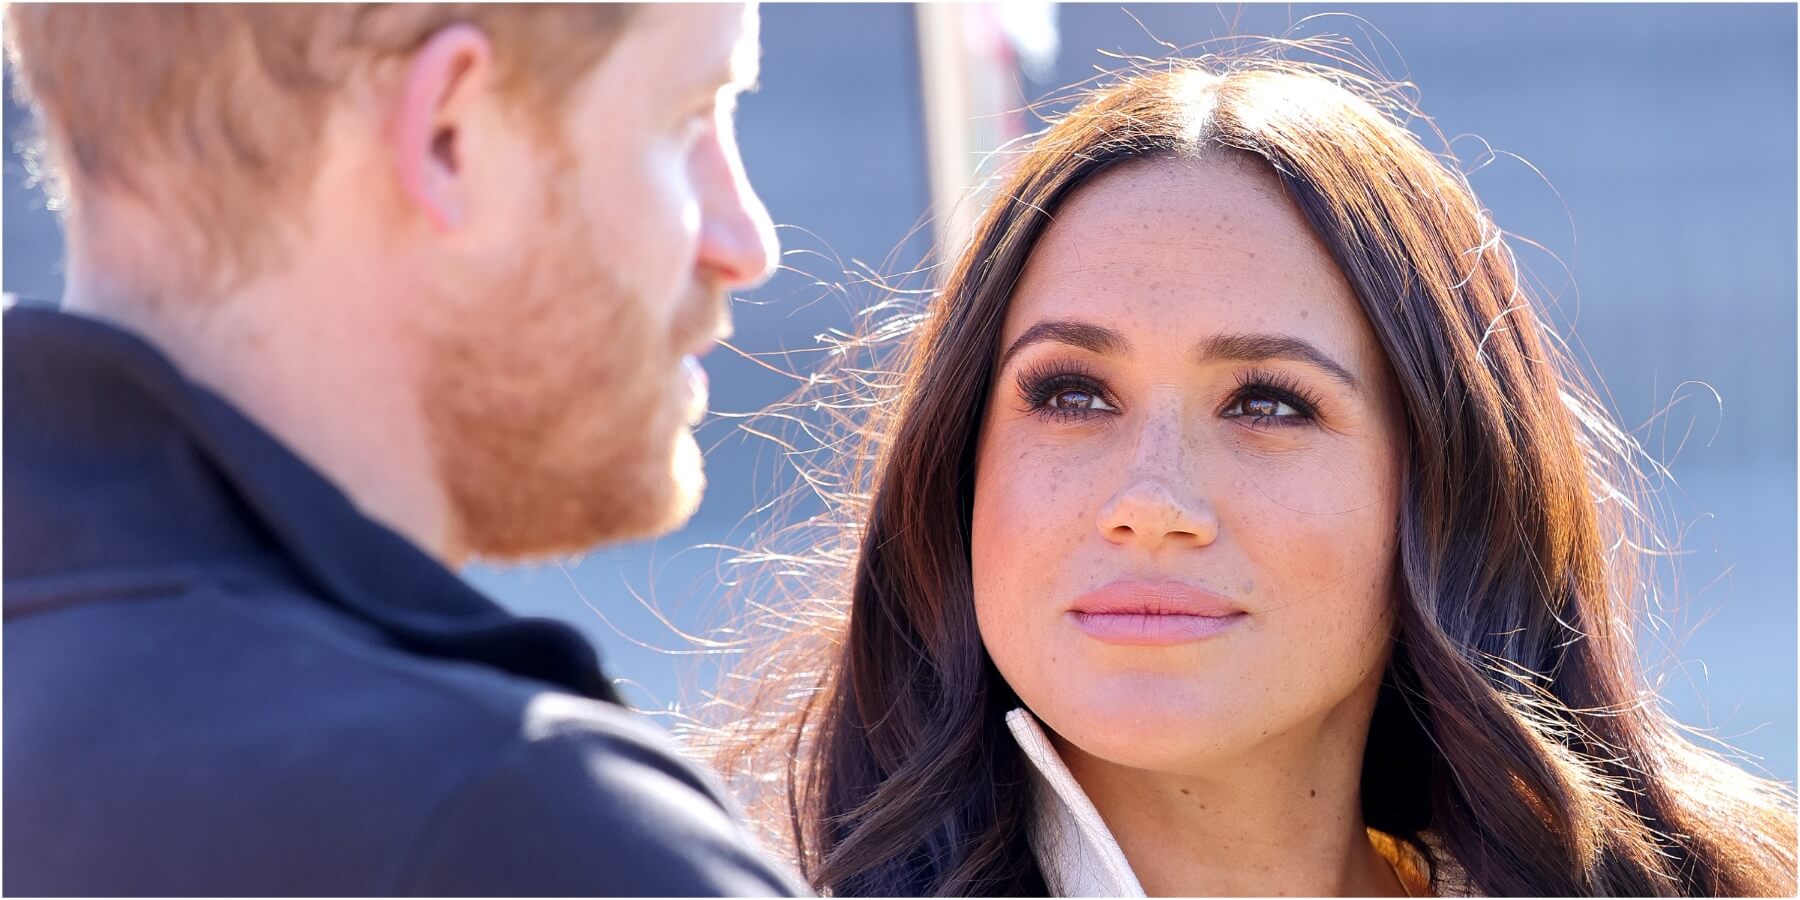 Prince Harry And Meghan Markles Strange Behavior Means They May Be Involved In Endgame